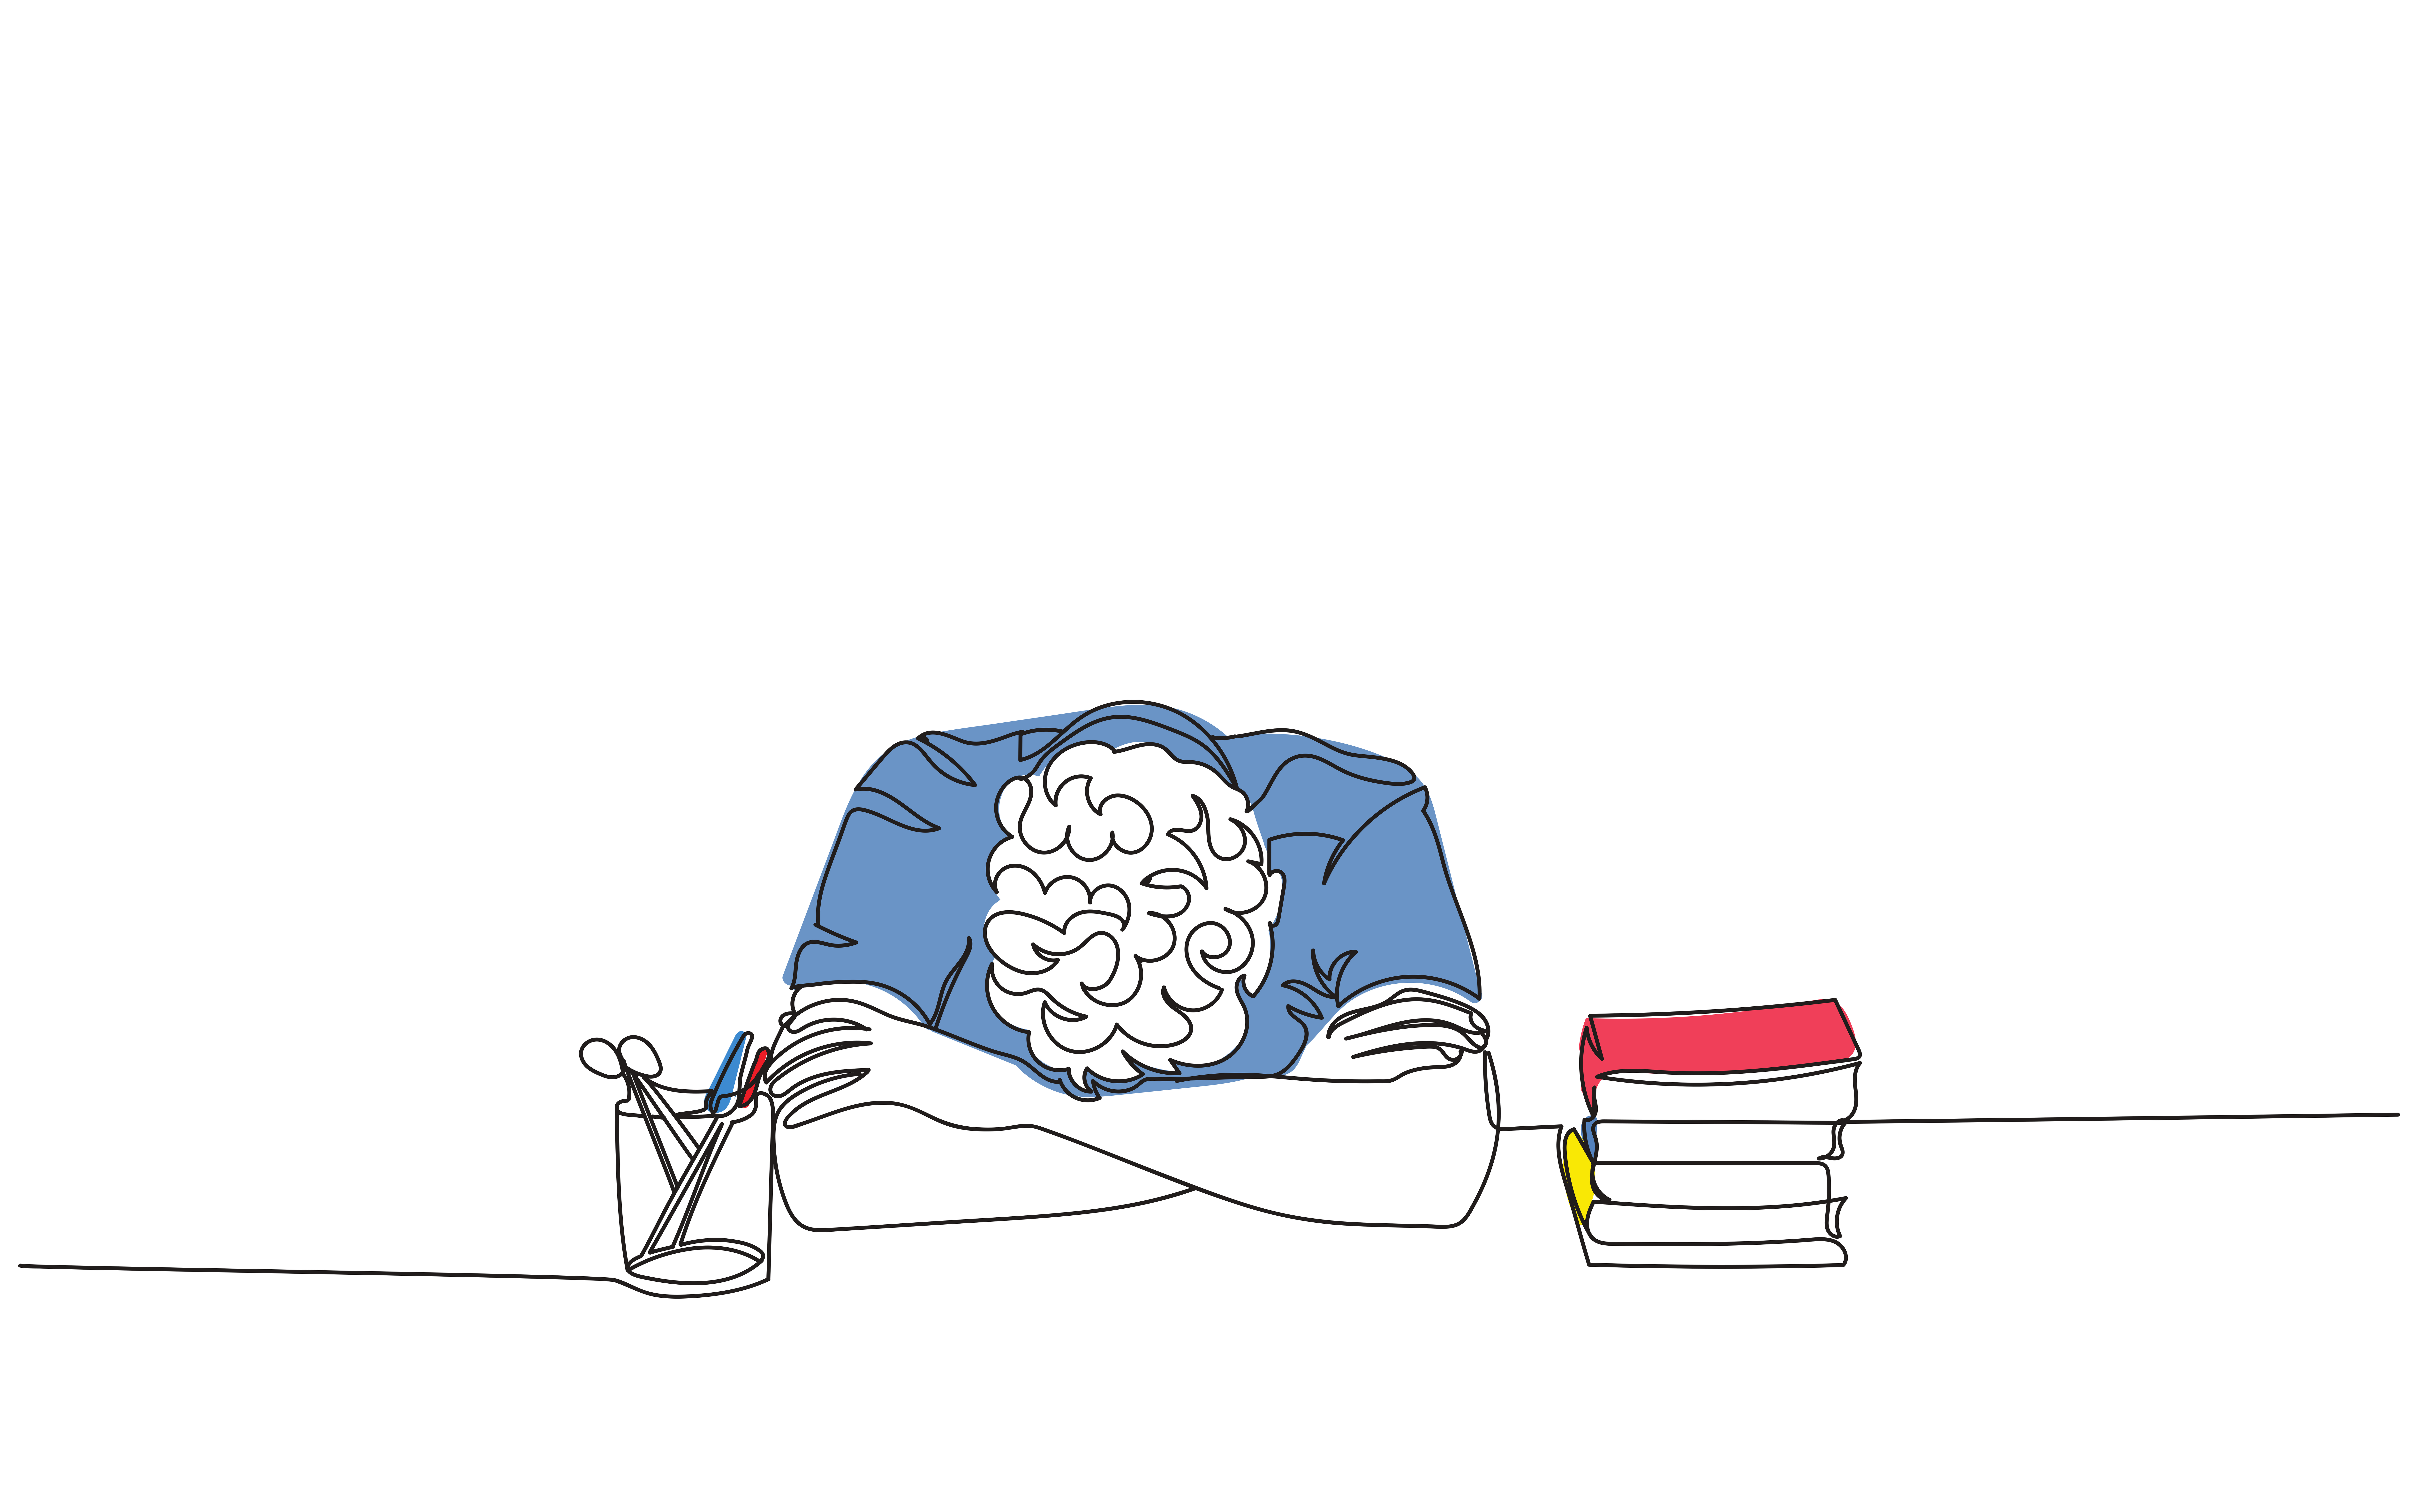 Illustrated character slouched at a desk, symbolizing the educational hurdles faced by youth or young adults experiencing the onset of severe mental illness symptoms, highlighting the need for supportive resources for families